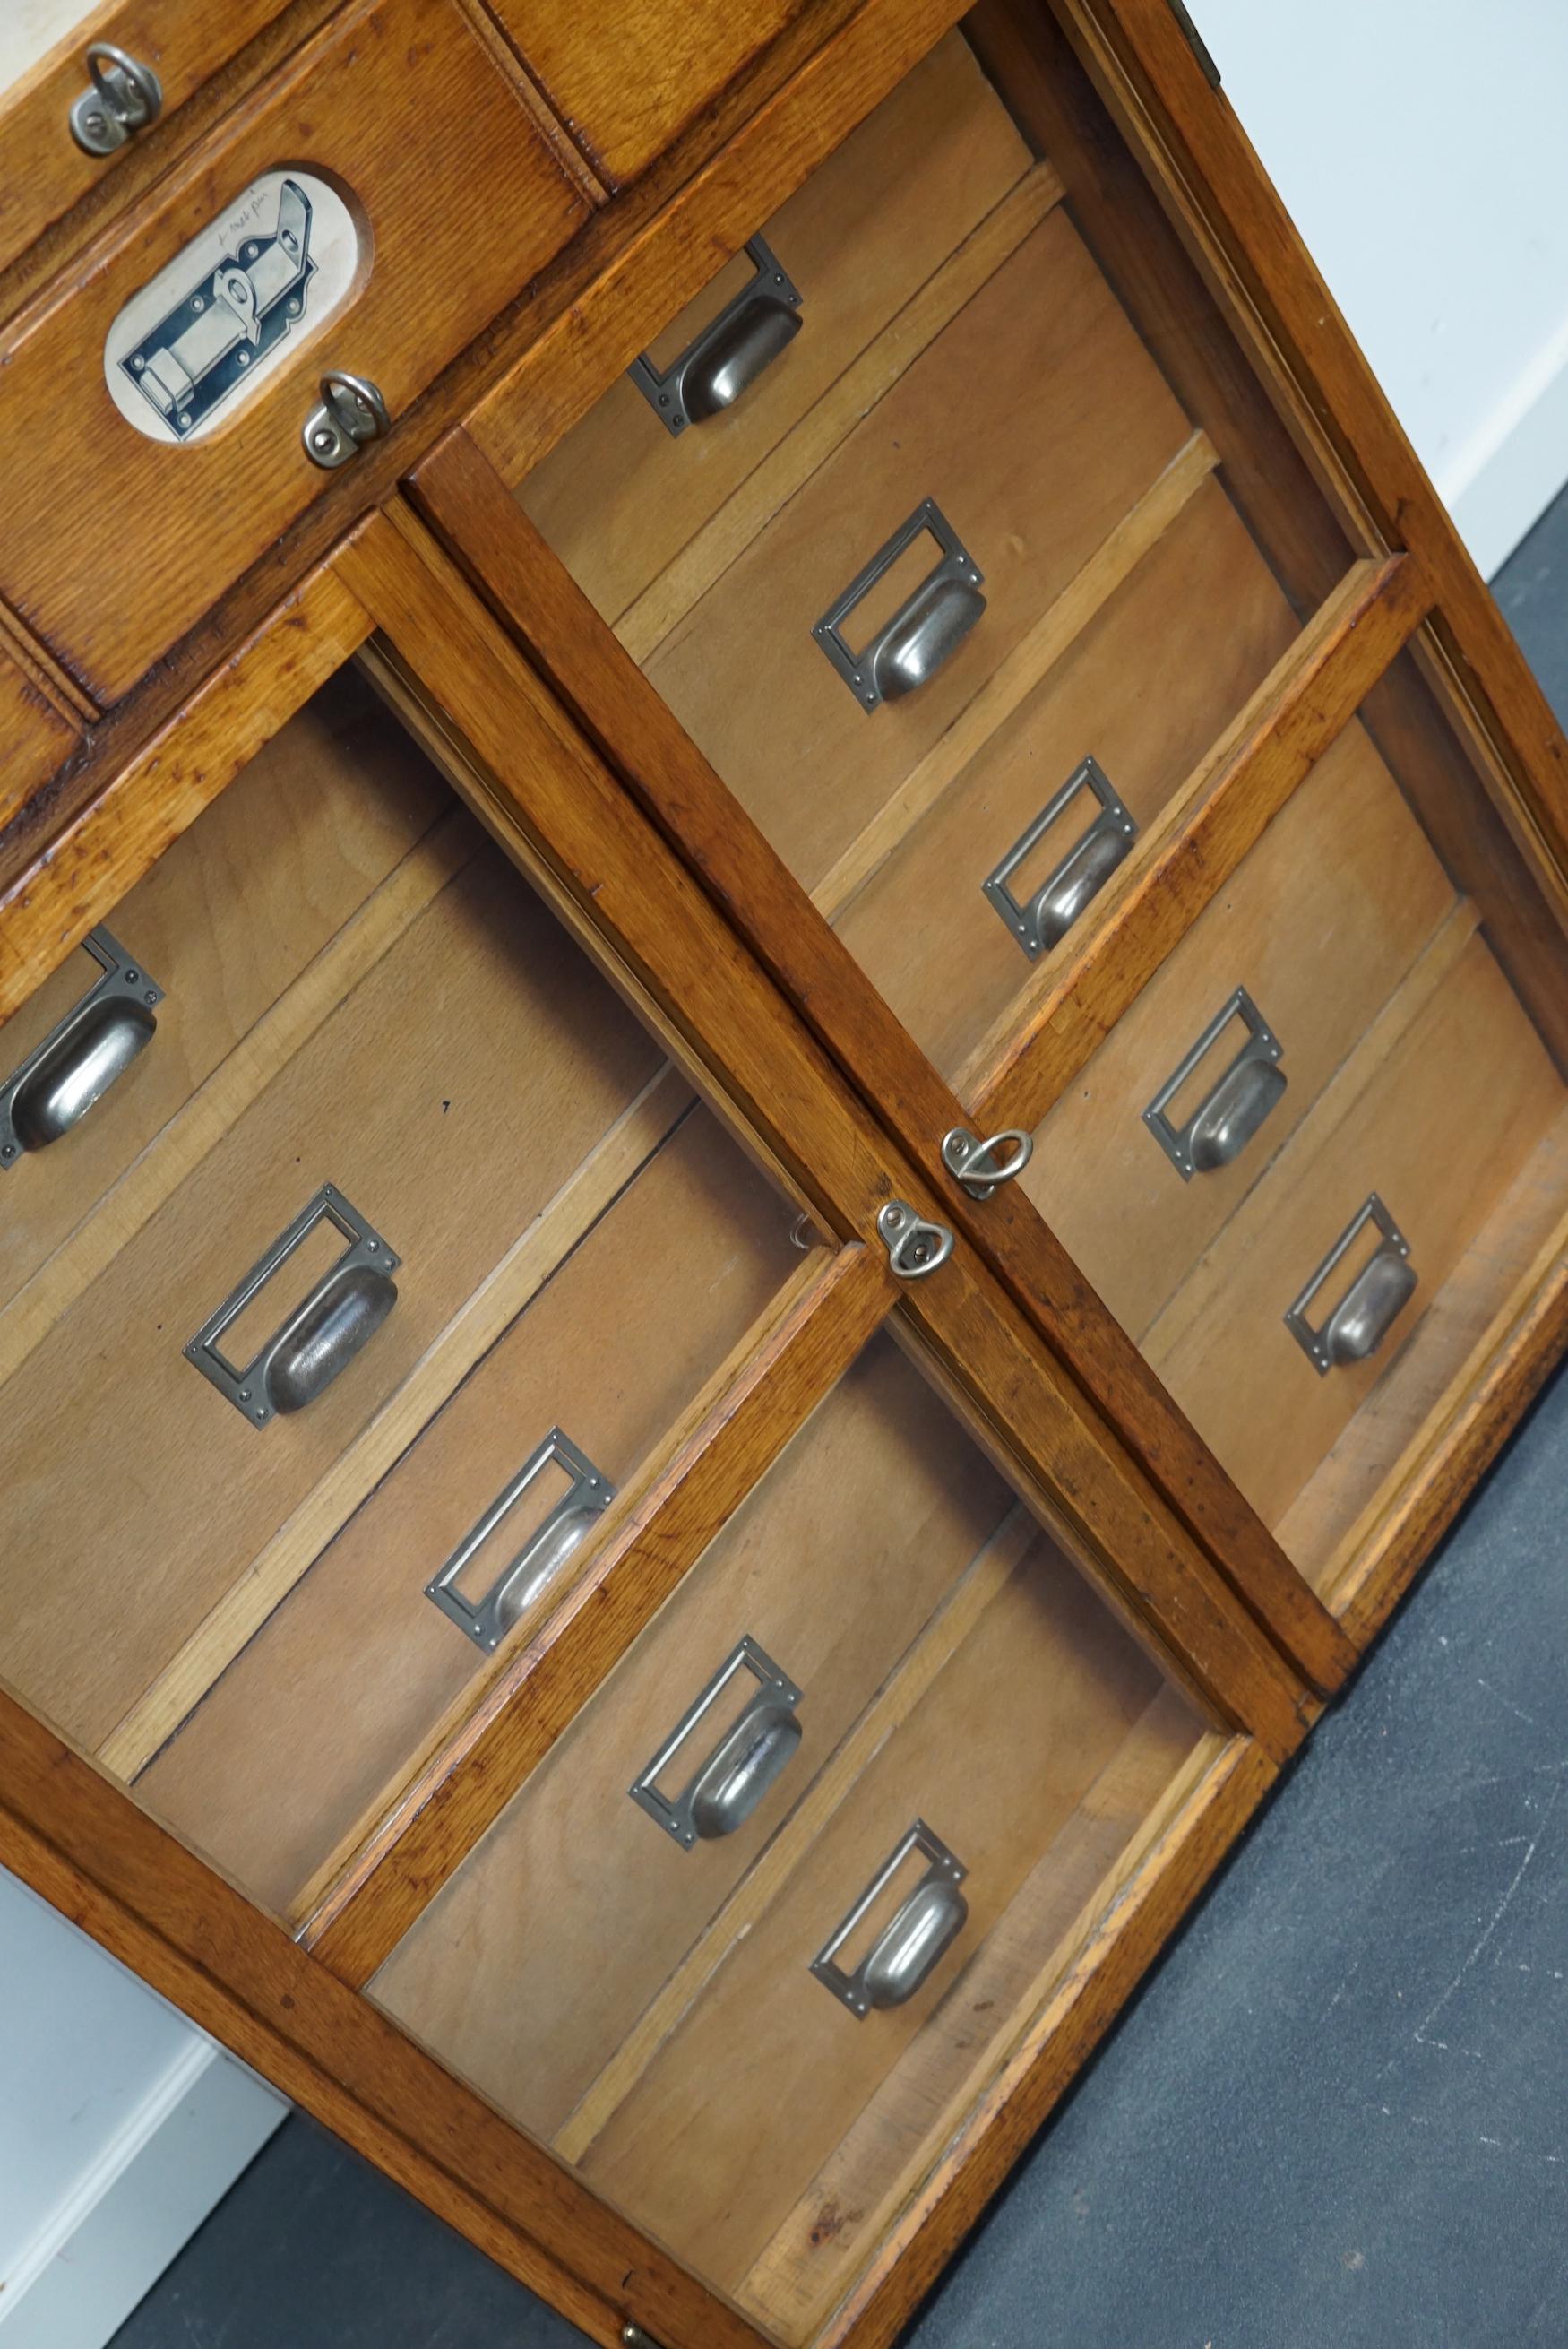 German Industrial Oak and Pine Apothecary Cabinet, Mid-20th Century For Sale 7